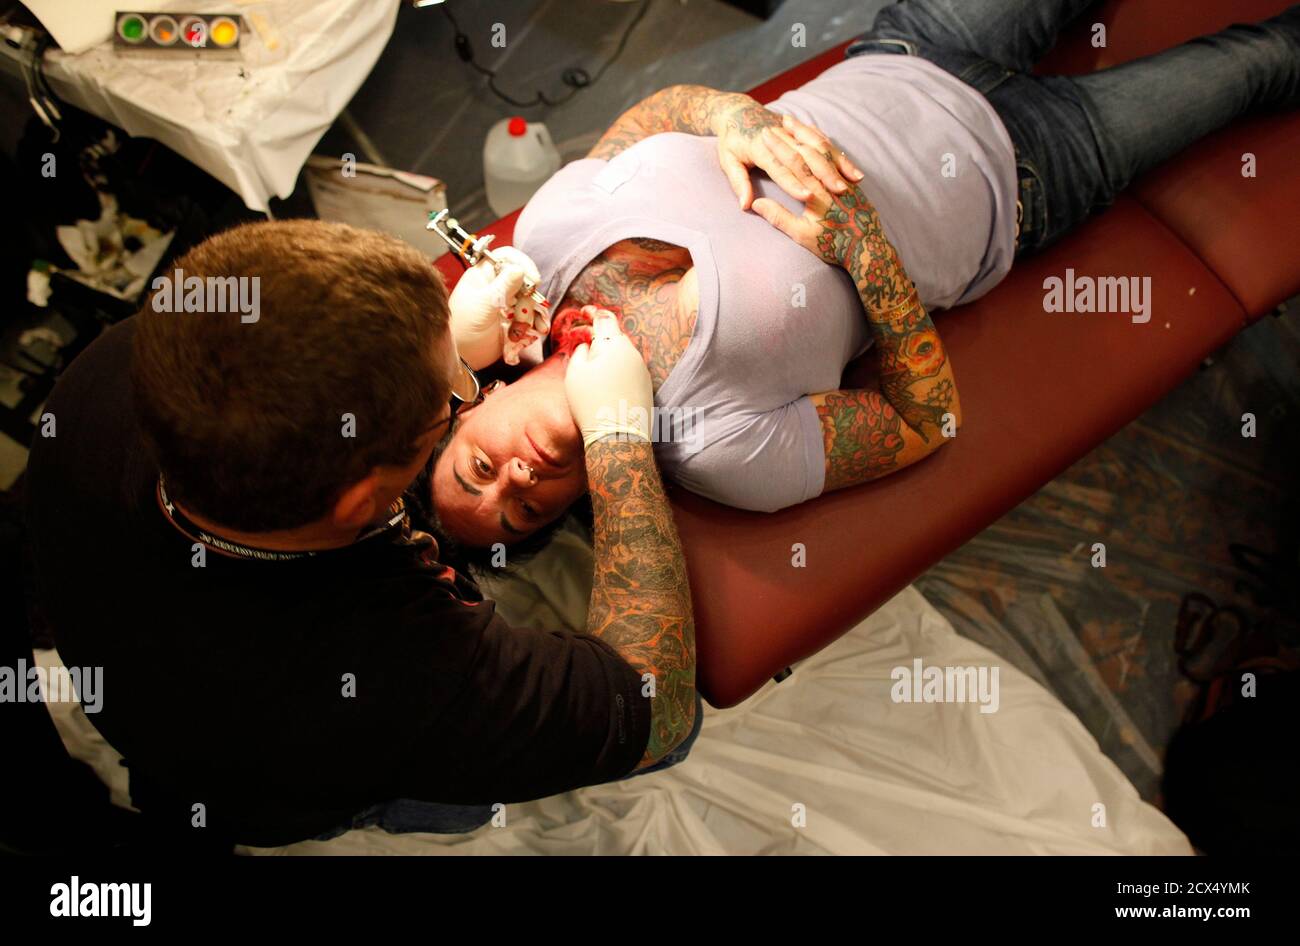 A woman has her neck tattooed during the National Tattoo Association  Convention in Cincinnati, Ohio, April 14, 2012. The hobby of collecting  tattoos has exploded into the mainstream in society with tattoo